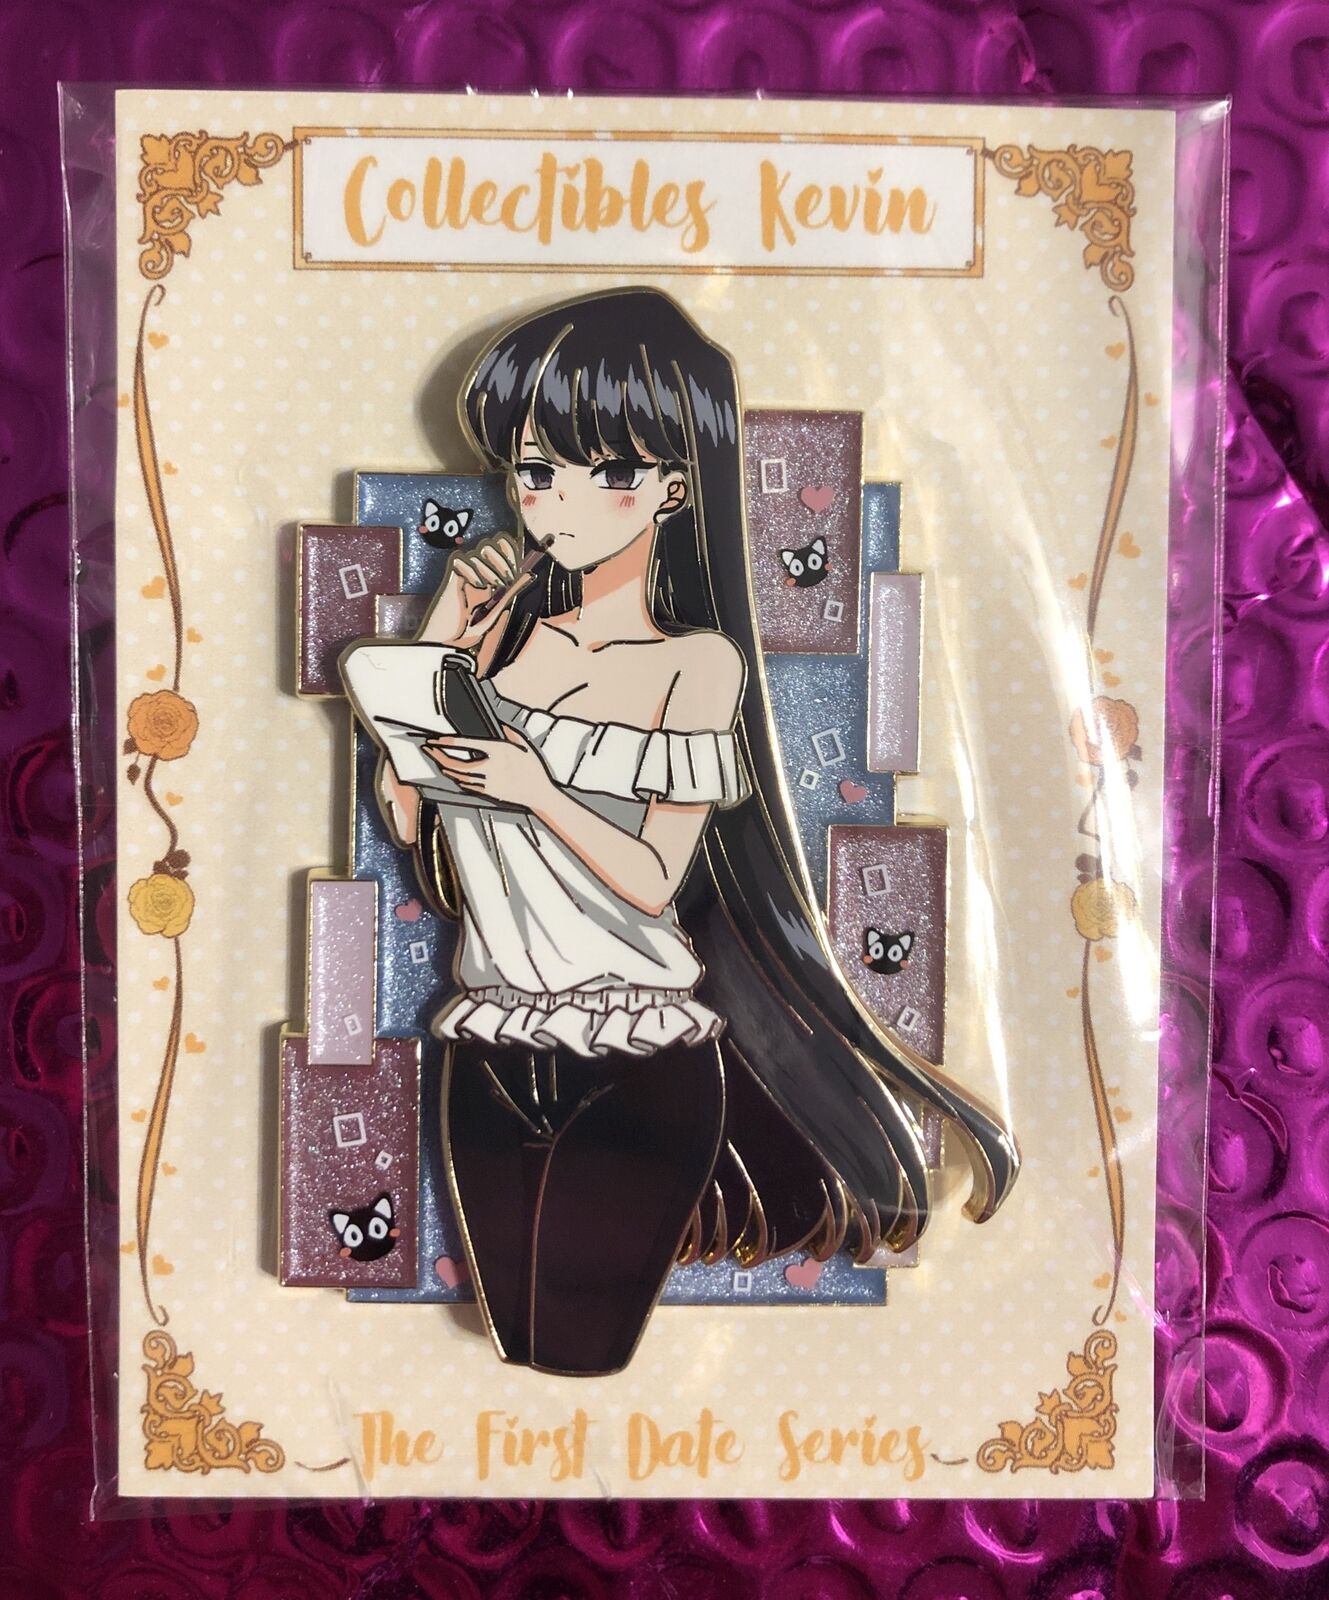 Komi Can’t Communicate Limited Edition Collectibles Kevin Gold Plated Enamel Pin